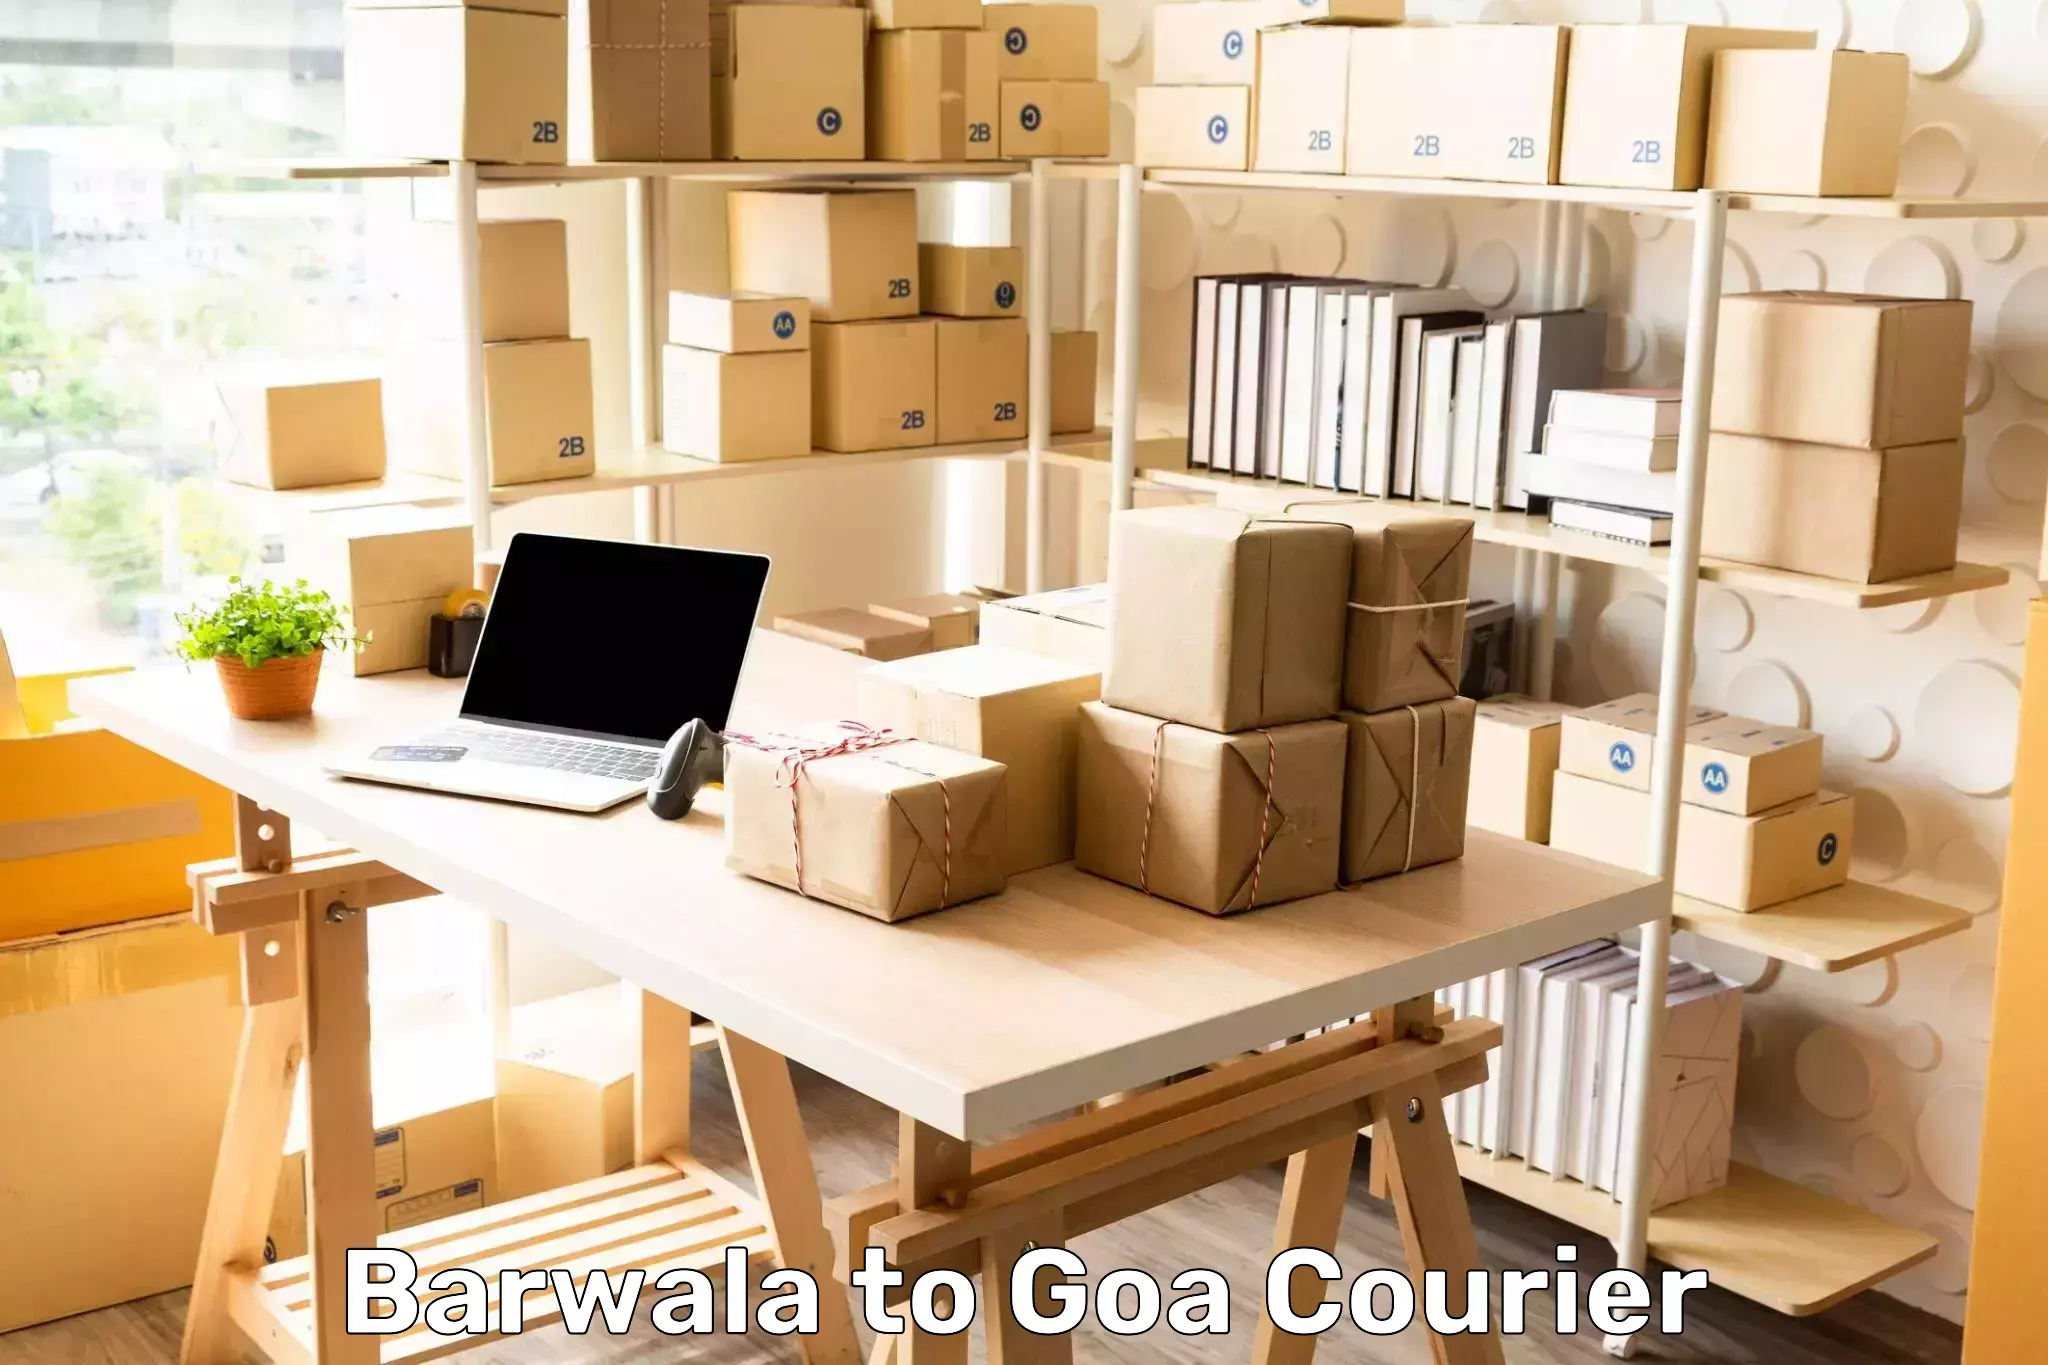 End-to-end delivery Barwala to Goa